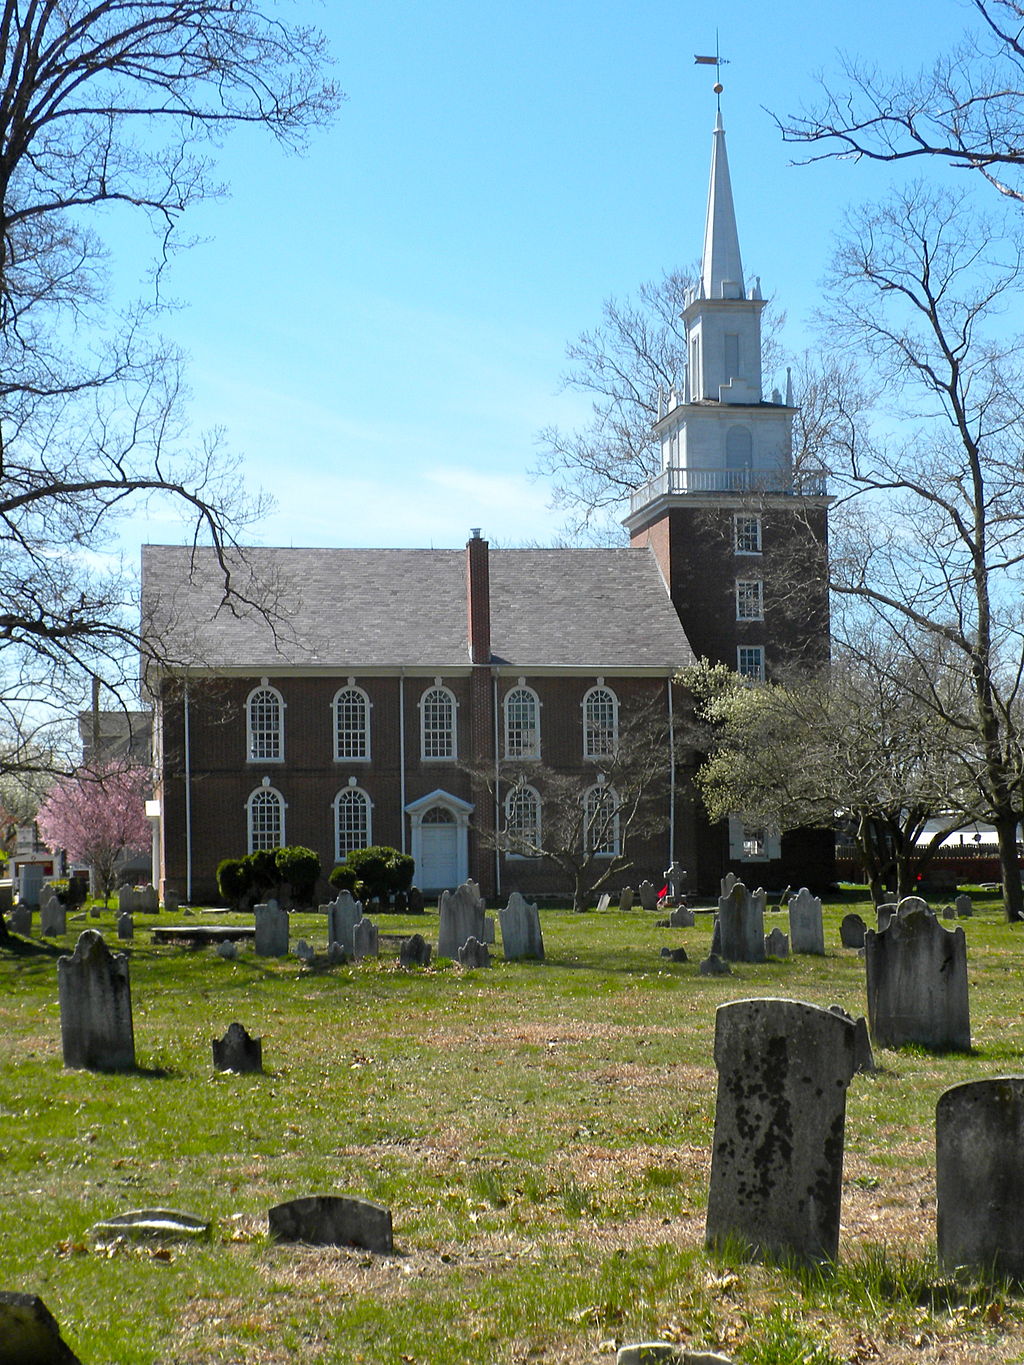 A color photograph of a church from the side. A graveyard with visible gravestones, trees, and grass is in the foreground, and the church is in the background.